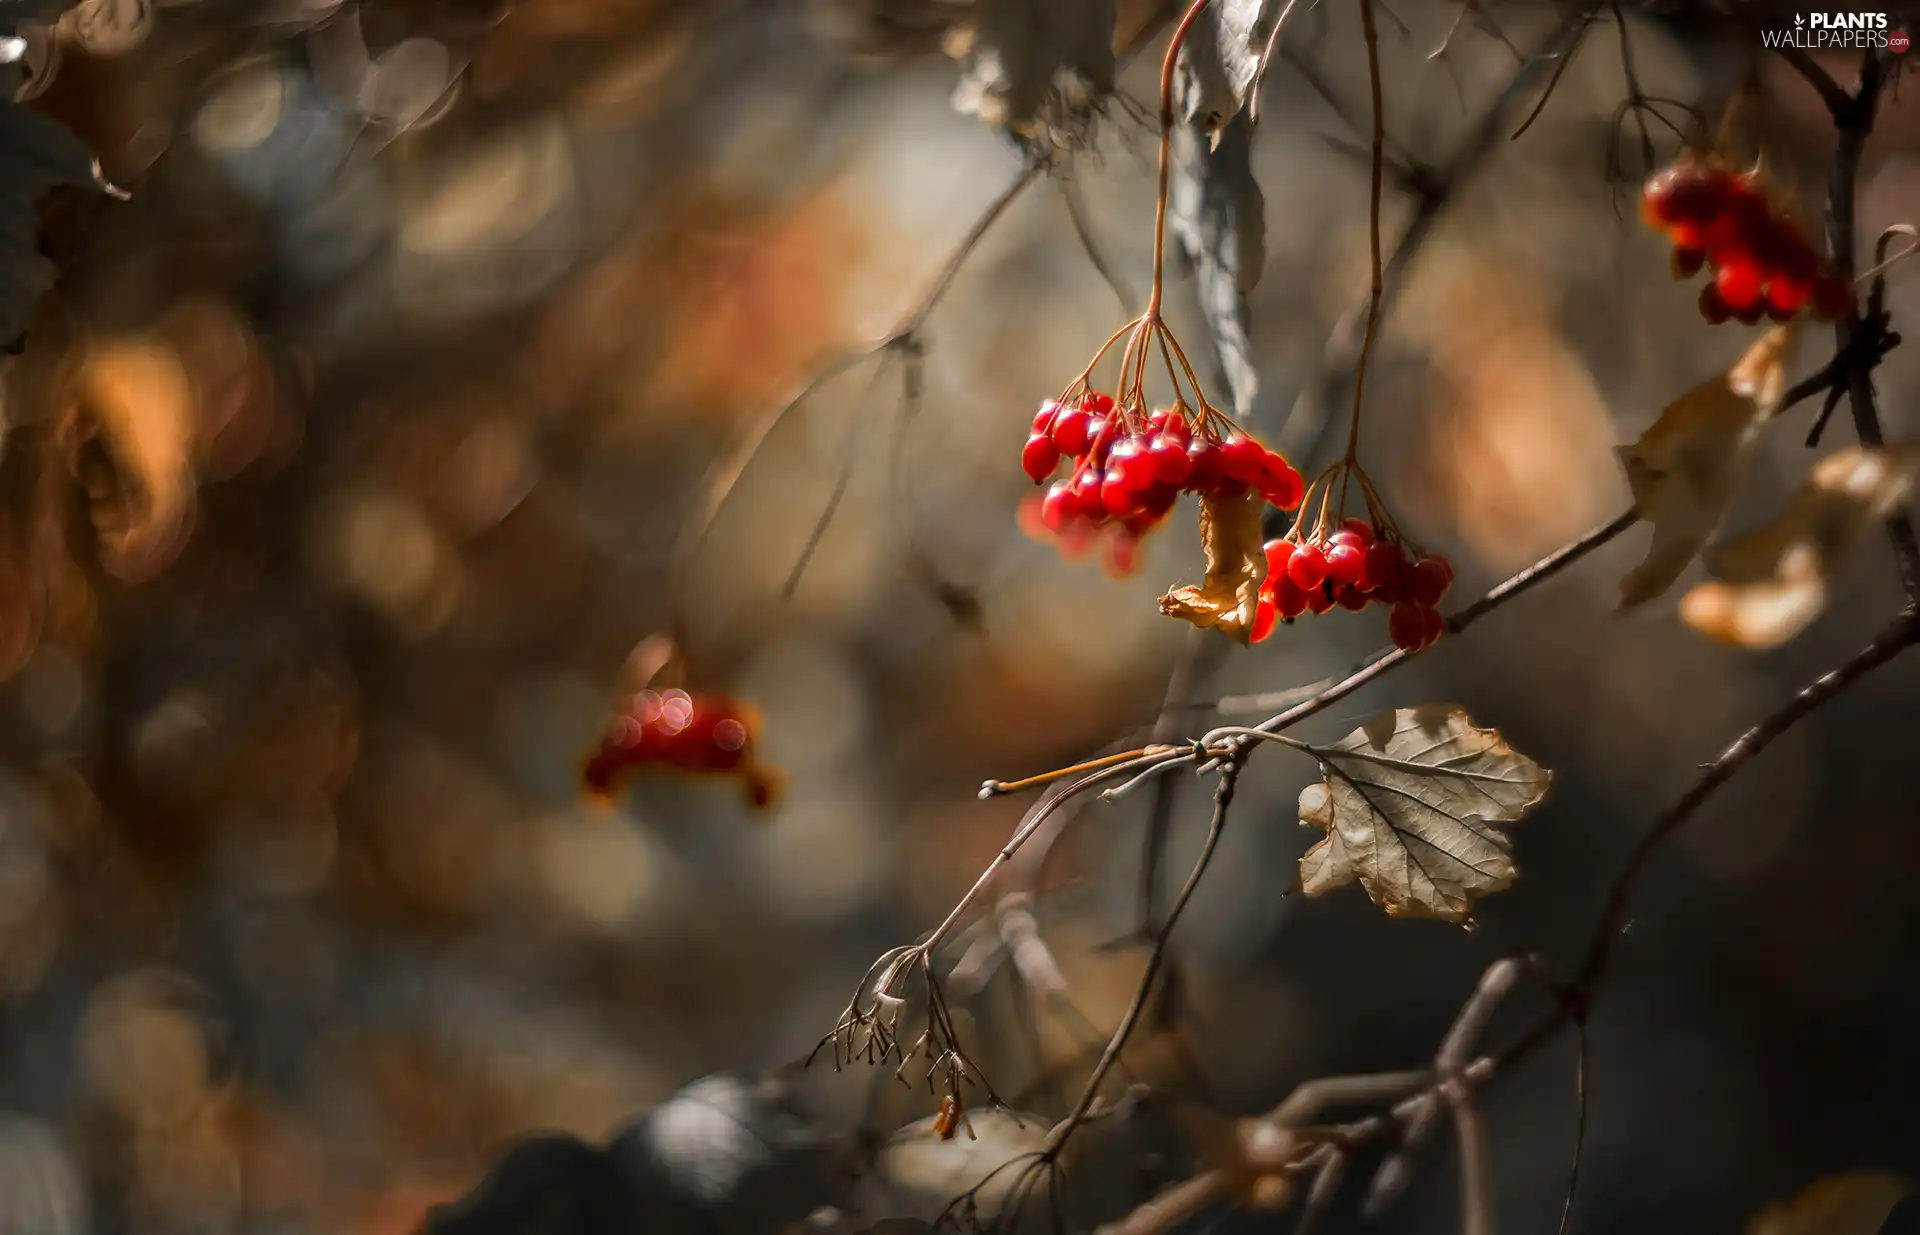 Red, Autumn, dry, leaves, Fruits, Twigs